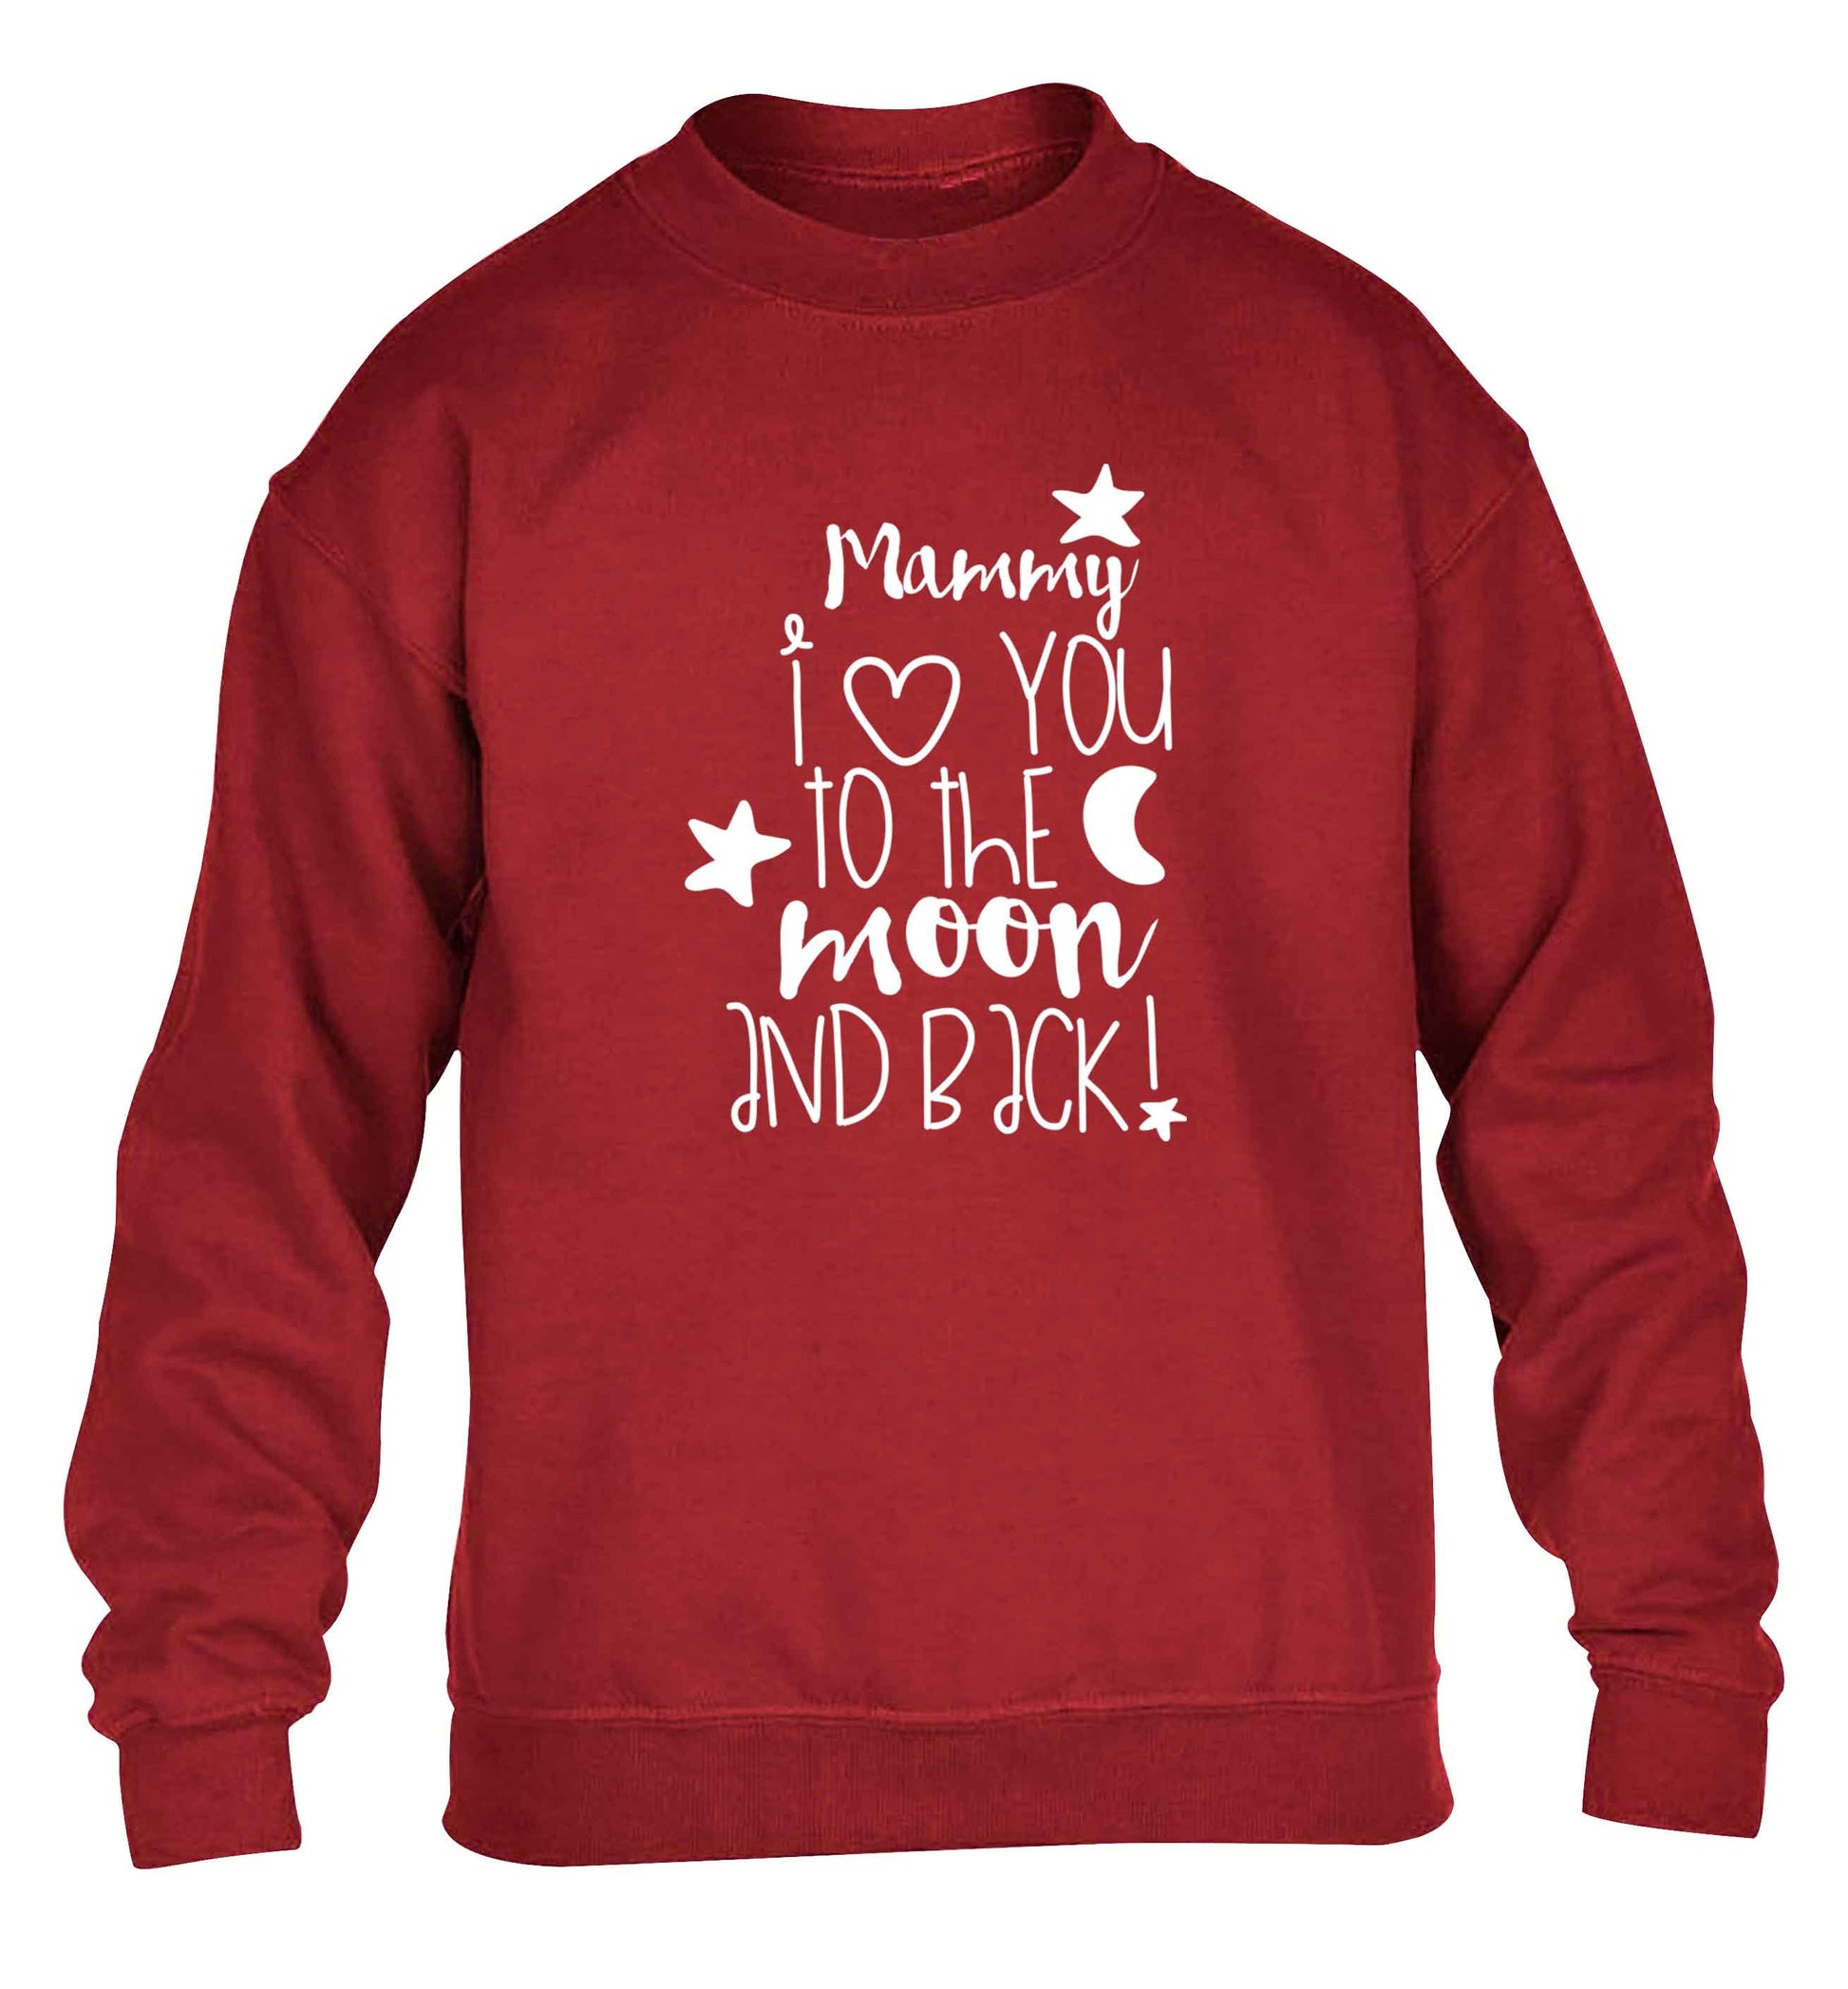 Mammy I love you to the moon and back children's grey sweater 12-13 Years